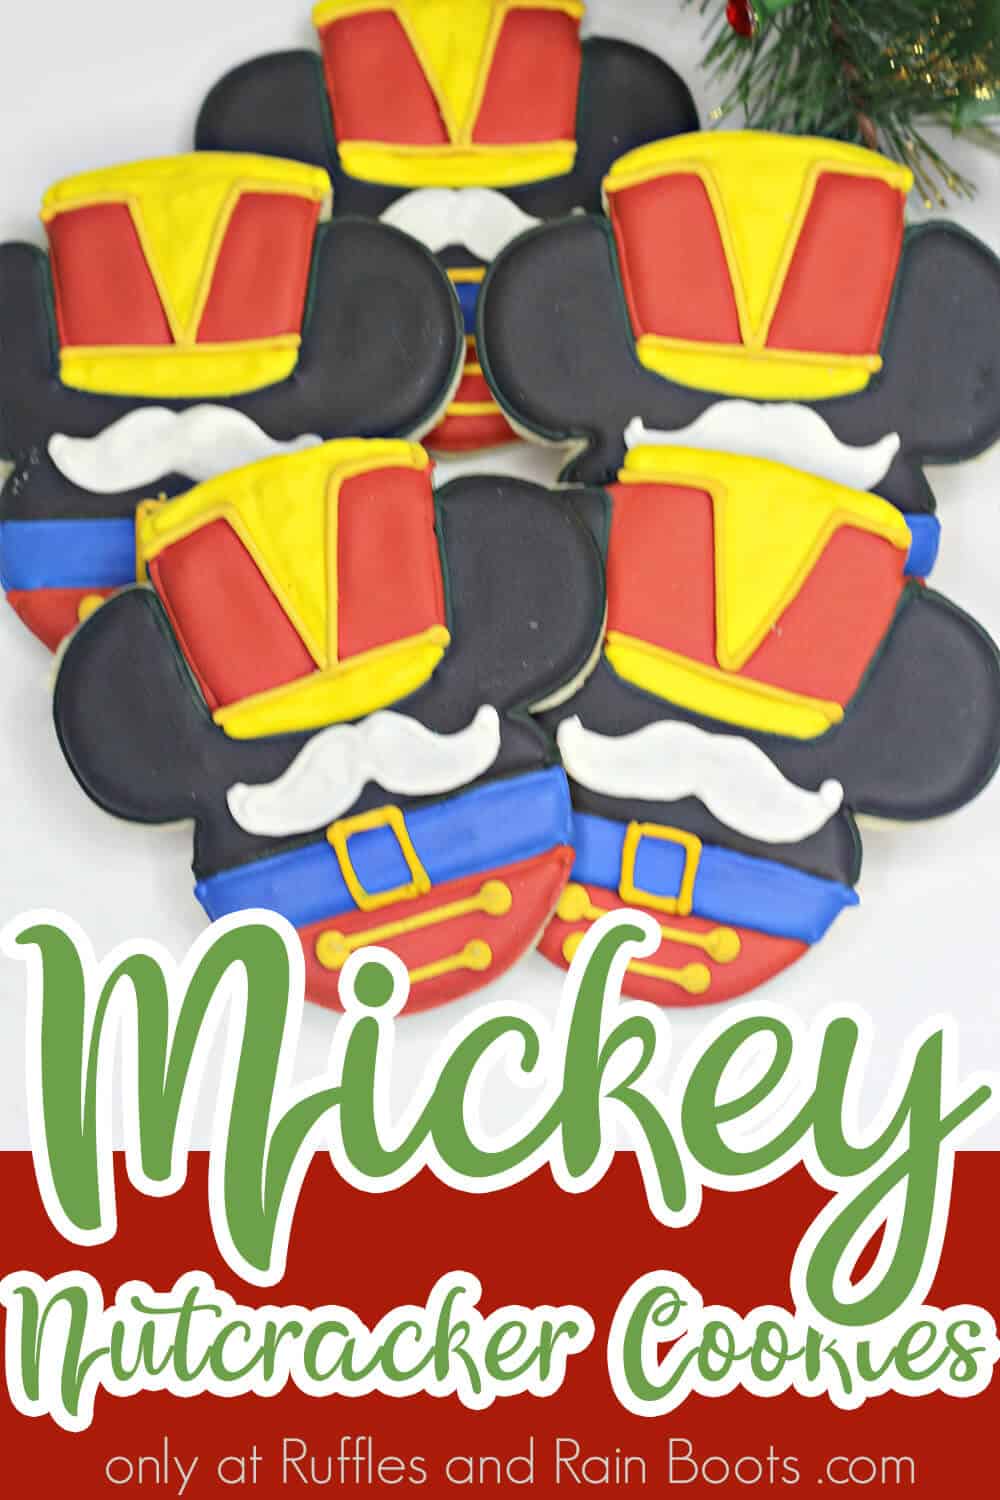 how to make christmas cookies with Mickey mouse nutcracker design with text which reads mickey flood cookies nutcracker